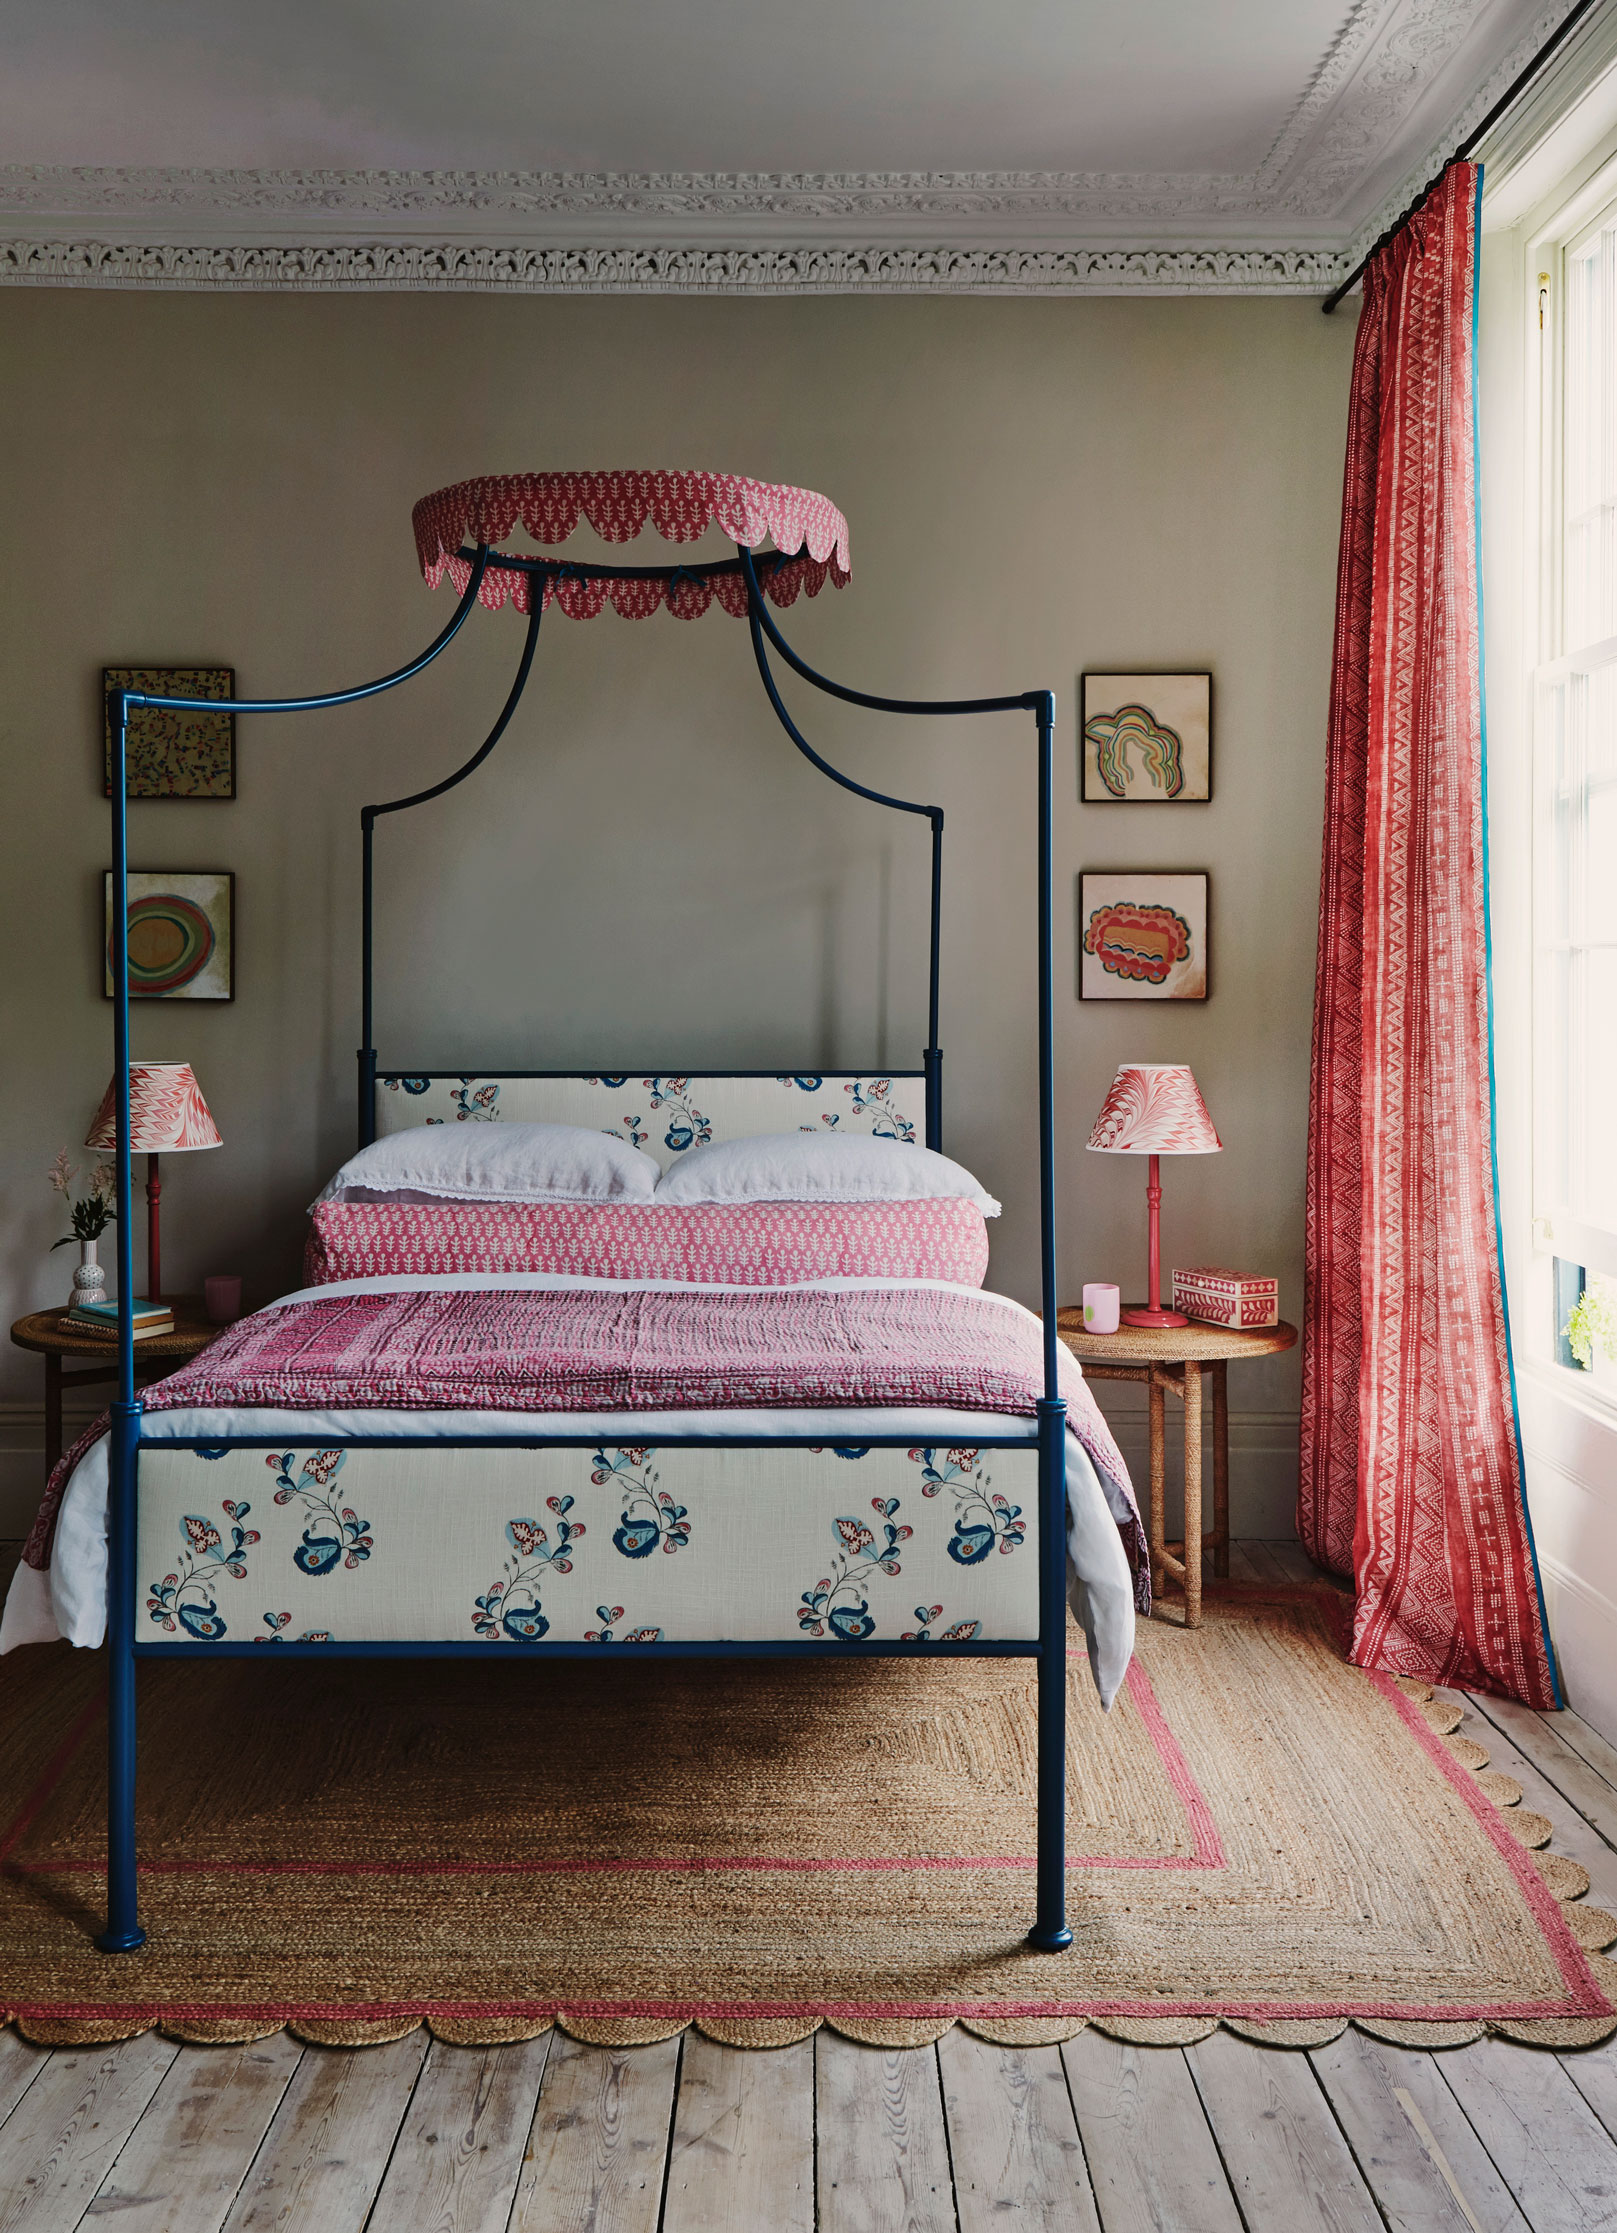 A taupe and red bedroom scheme illustrating the best bedroom colors, with a jute rug, floral patterned headboard on a metal four poster bed and red patterned accents in the drapes, lighting and bed linen.